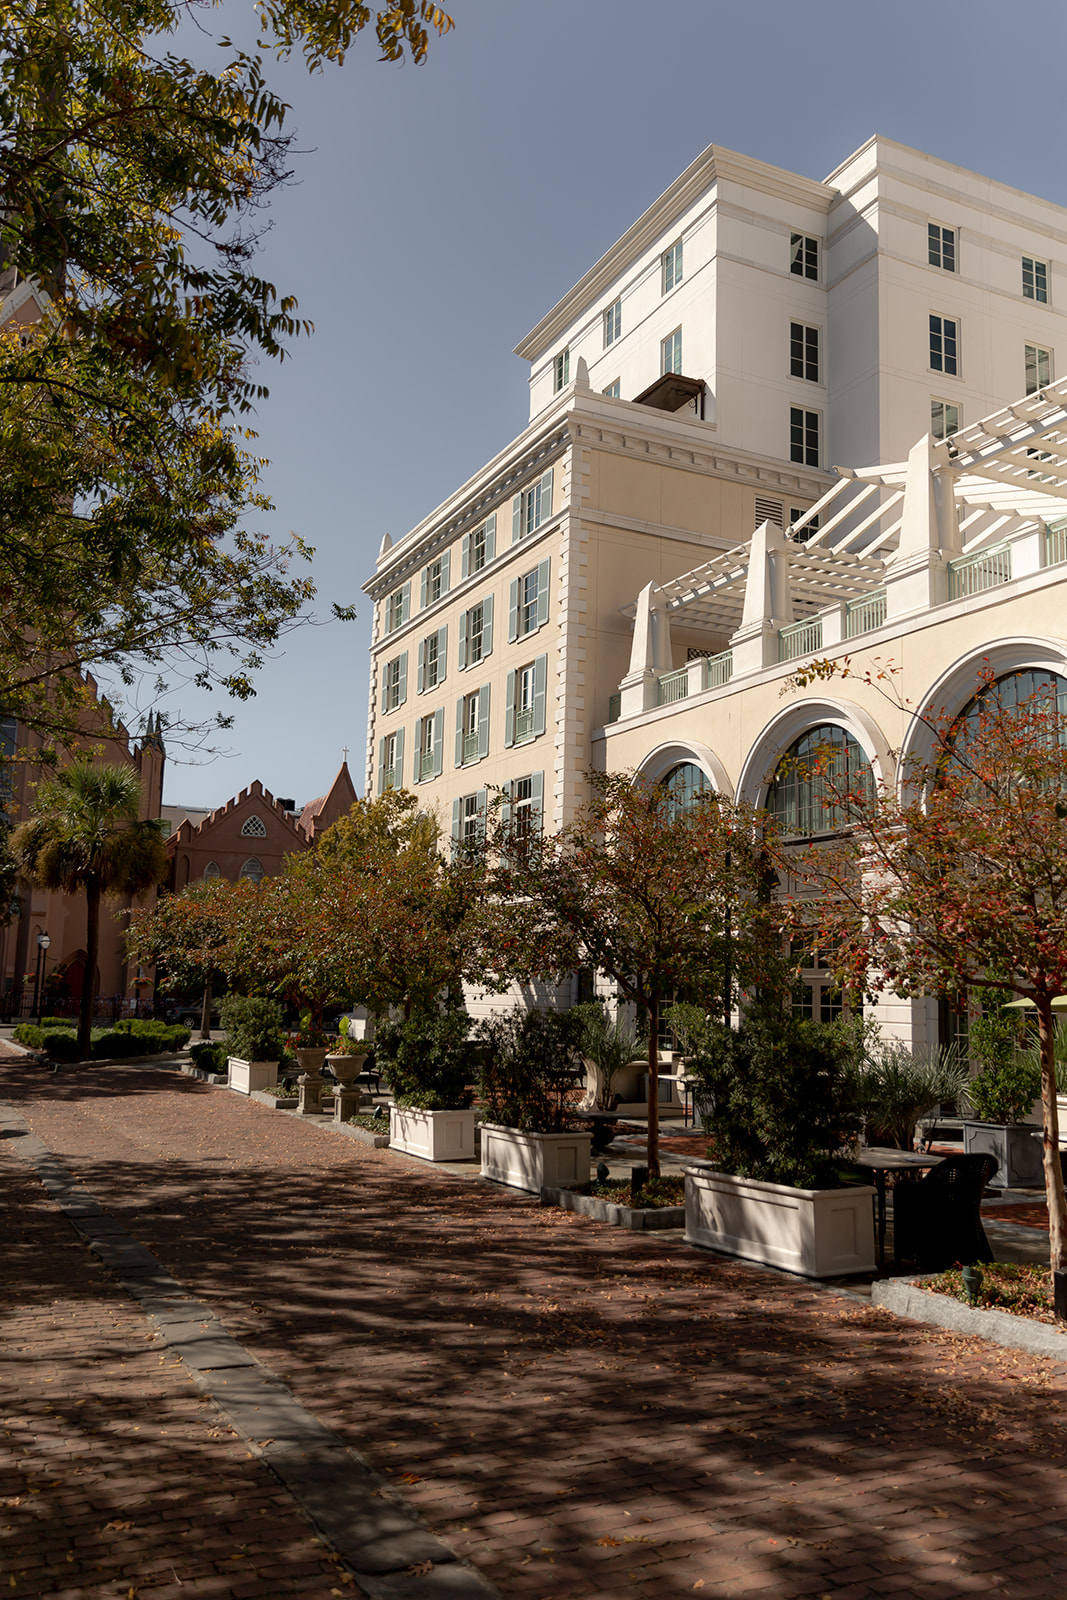 Look at Hotel Bennett in Charleston from Marion Square boardwalk